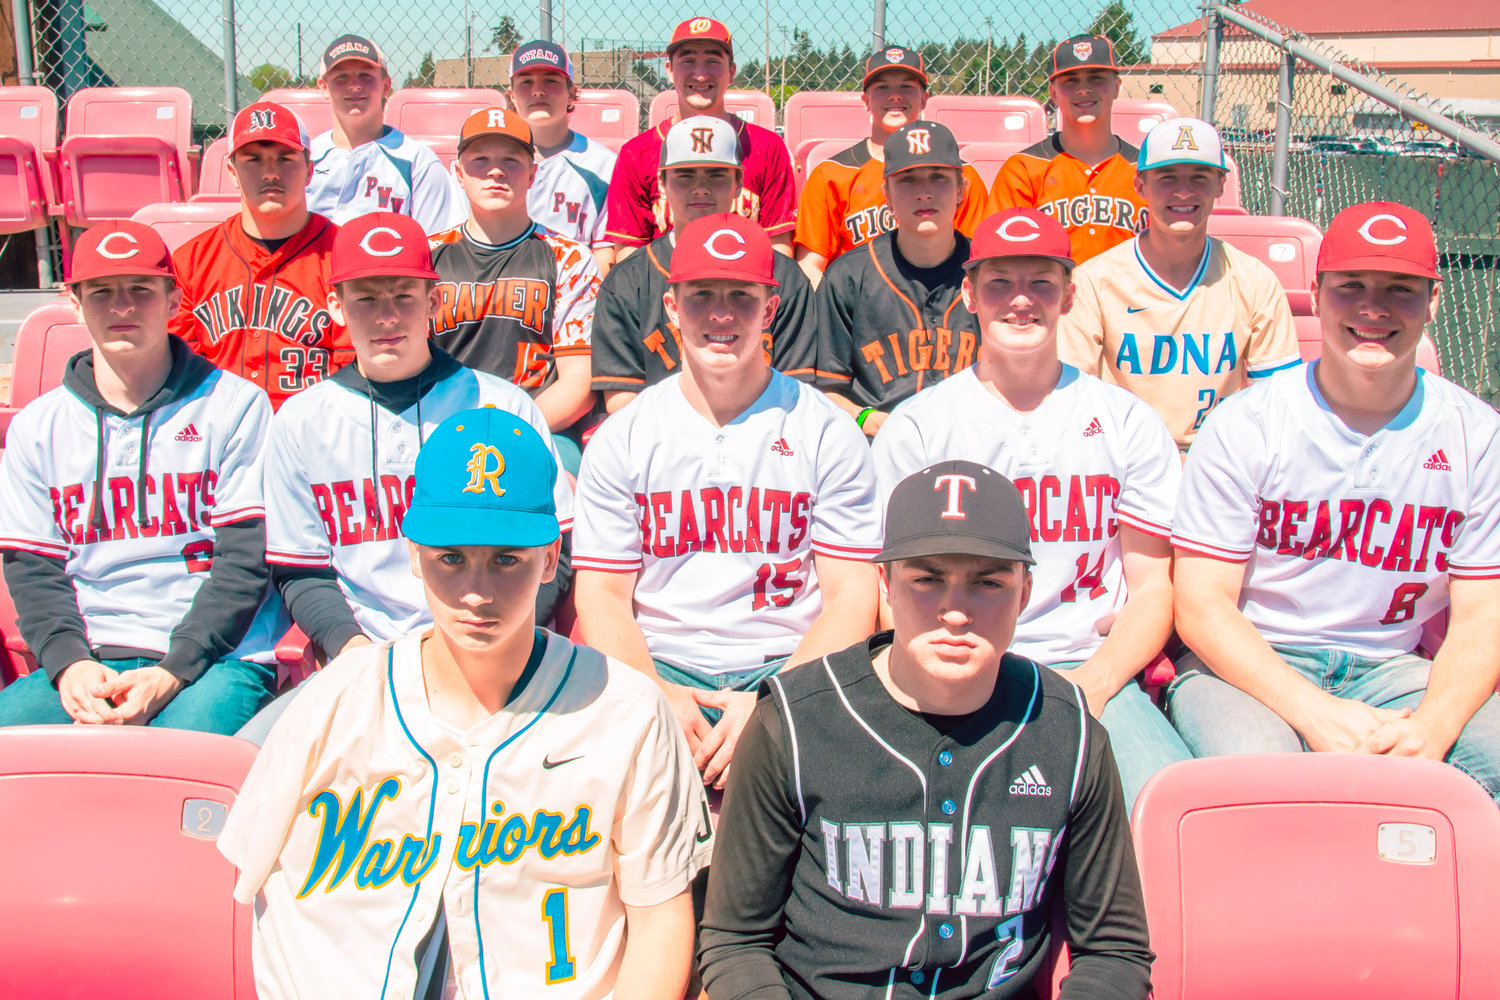 The All-Area Baseball team poses for a photo in the stands at Wheeler Field in Centralia on Sunday.